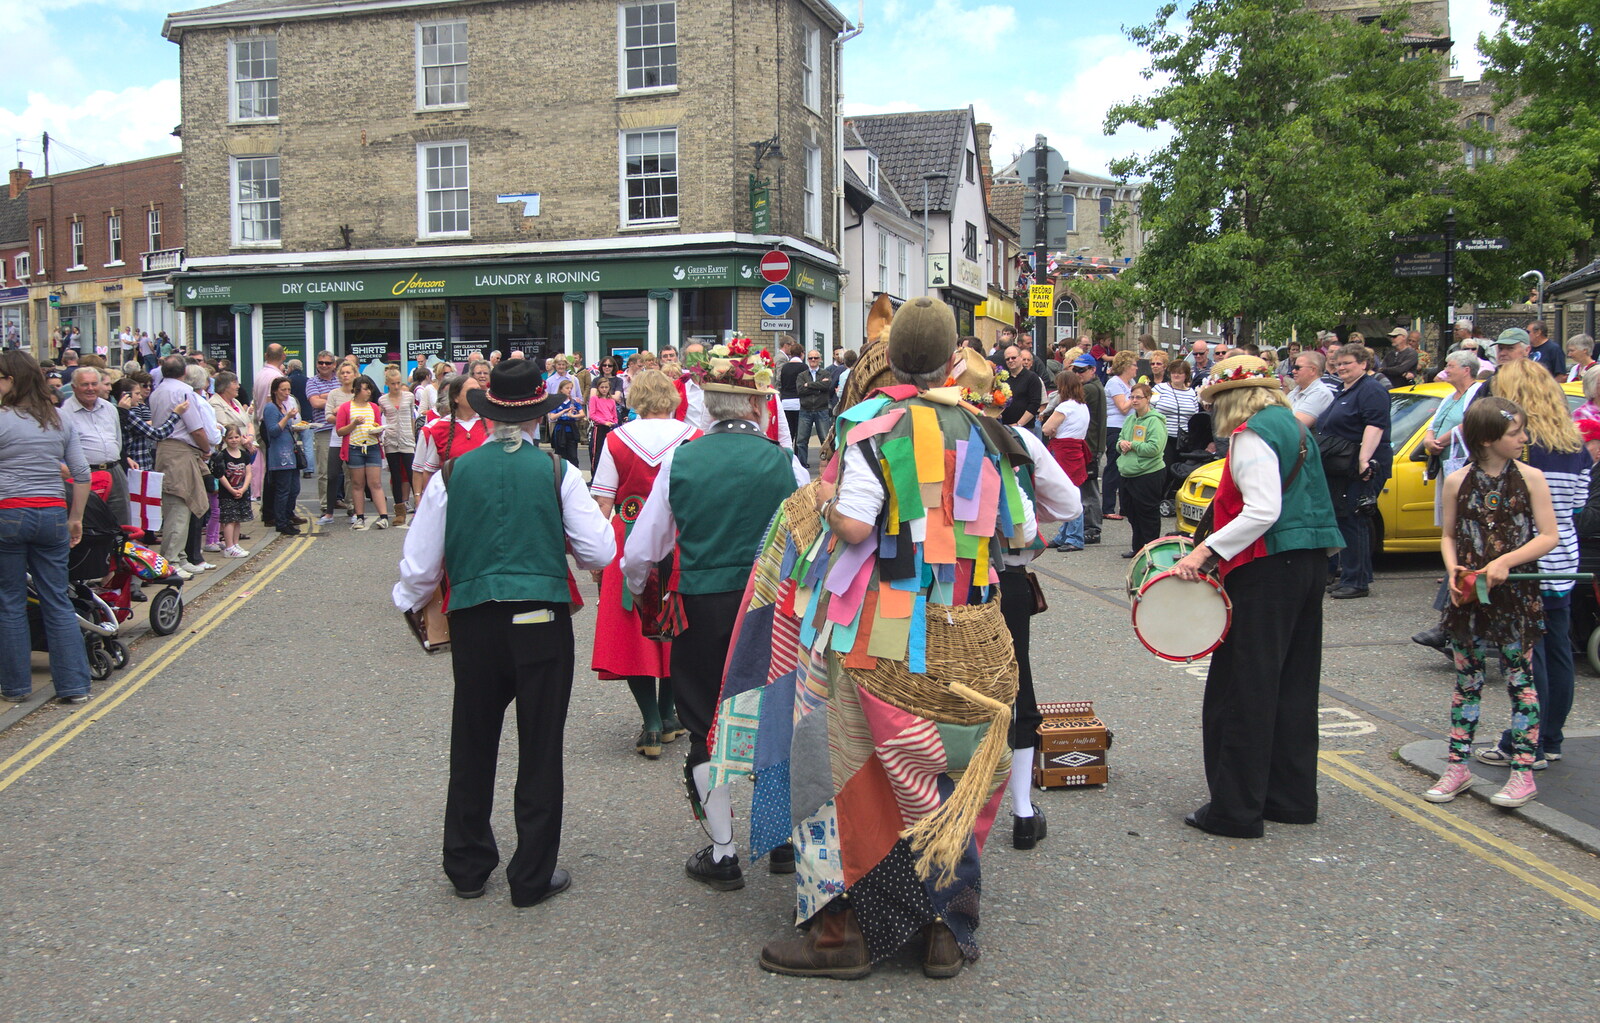 The back of the band from Morris Dancing and a Carnival Procession, Diss, Norfolk - 17th June 2012